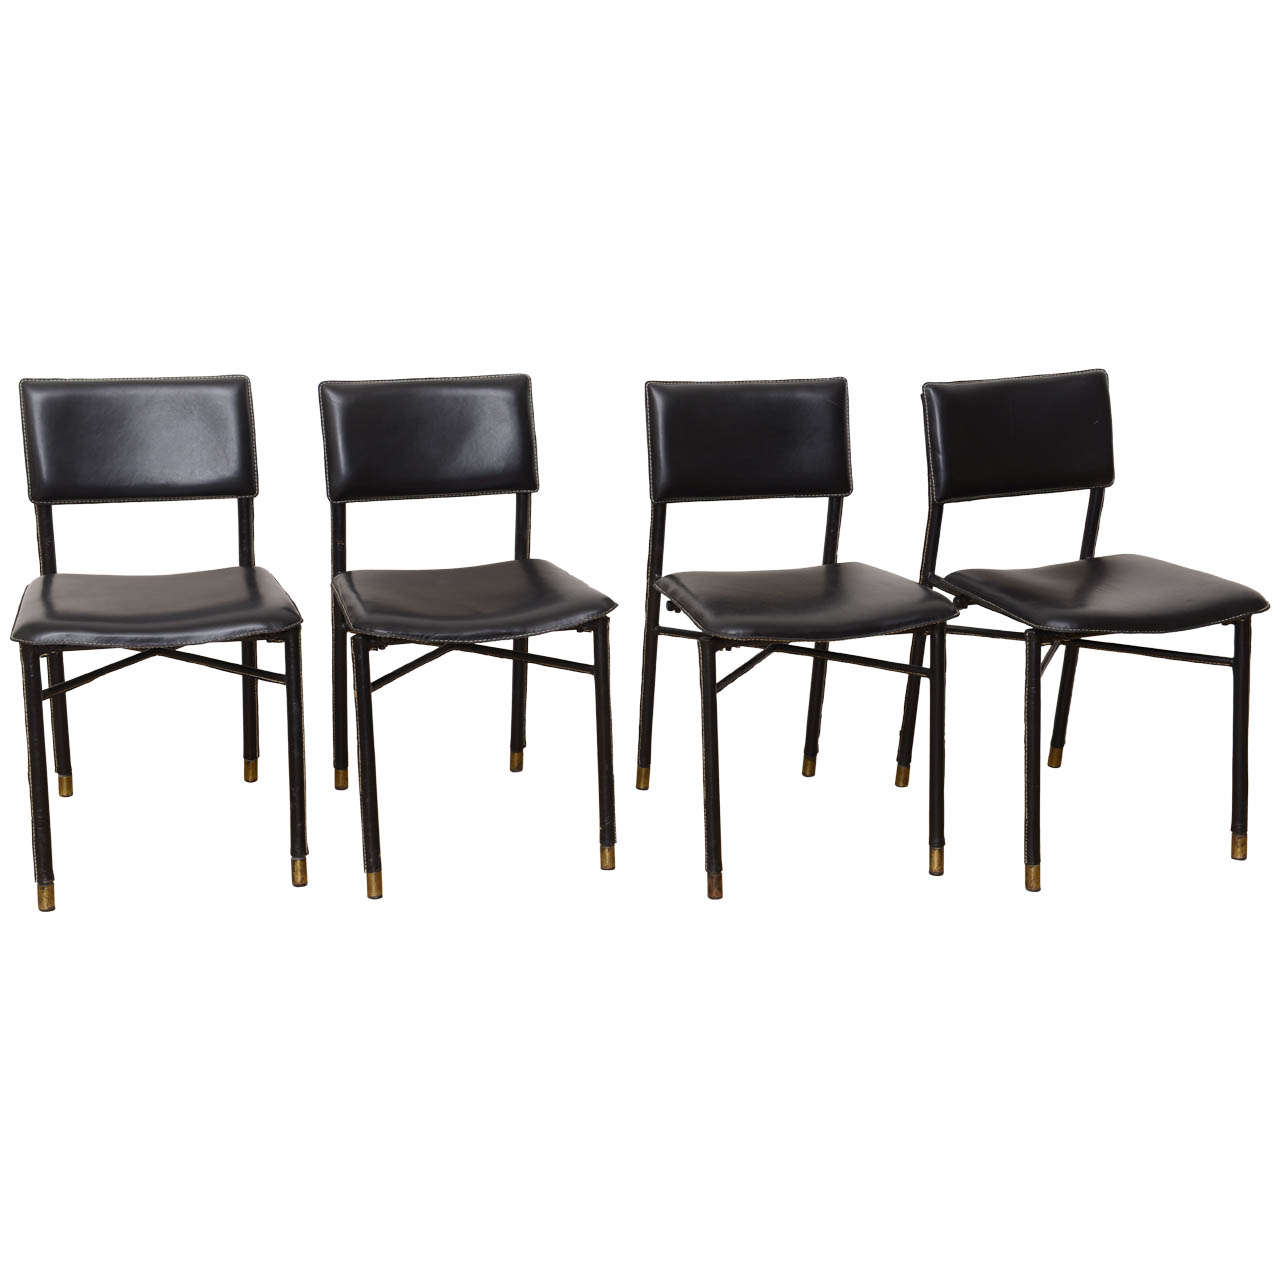 Four Hand Stitched Black Leather Chairs by Jacques Adnet